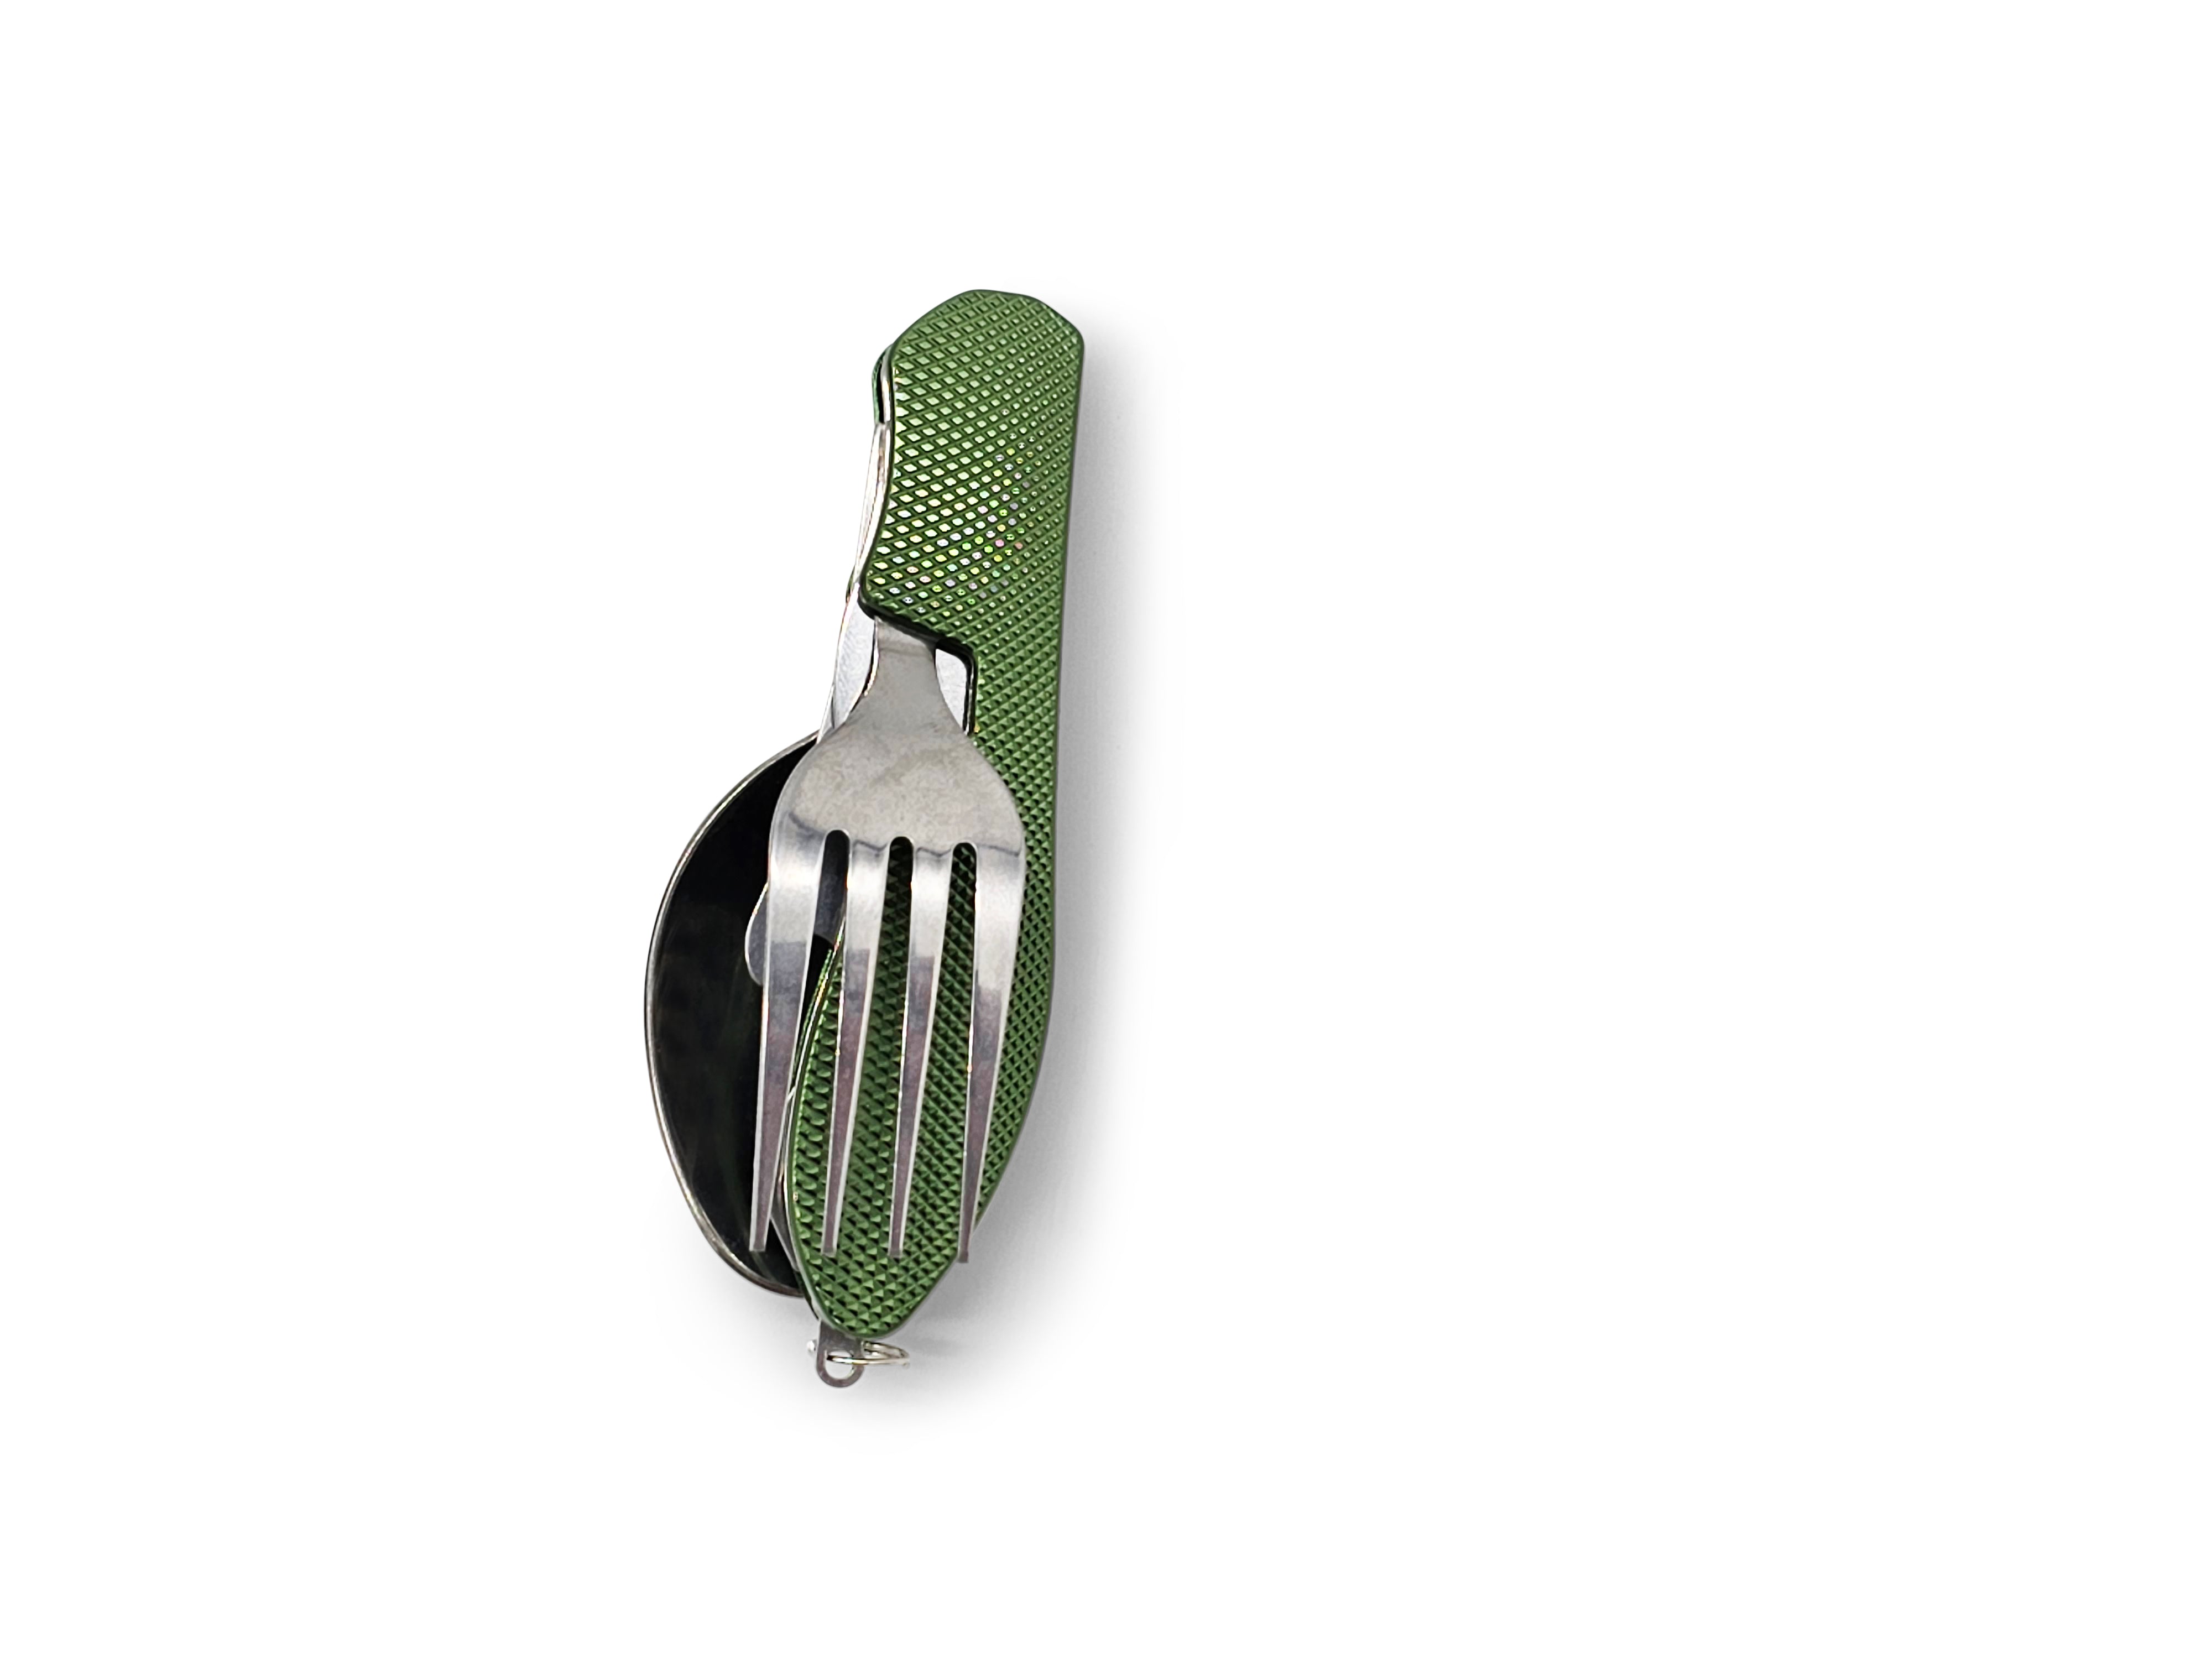 Visland 5 in 1 Outdoor Survival Tools Multifunctional Camping EDC Kit Handy  Fork Knife Spoon Bottle/Can Opener 